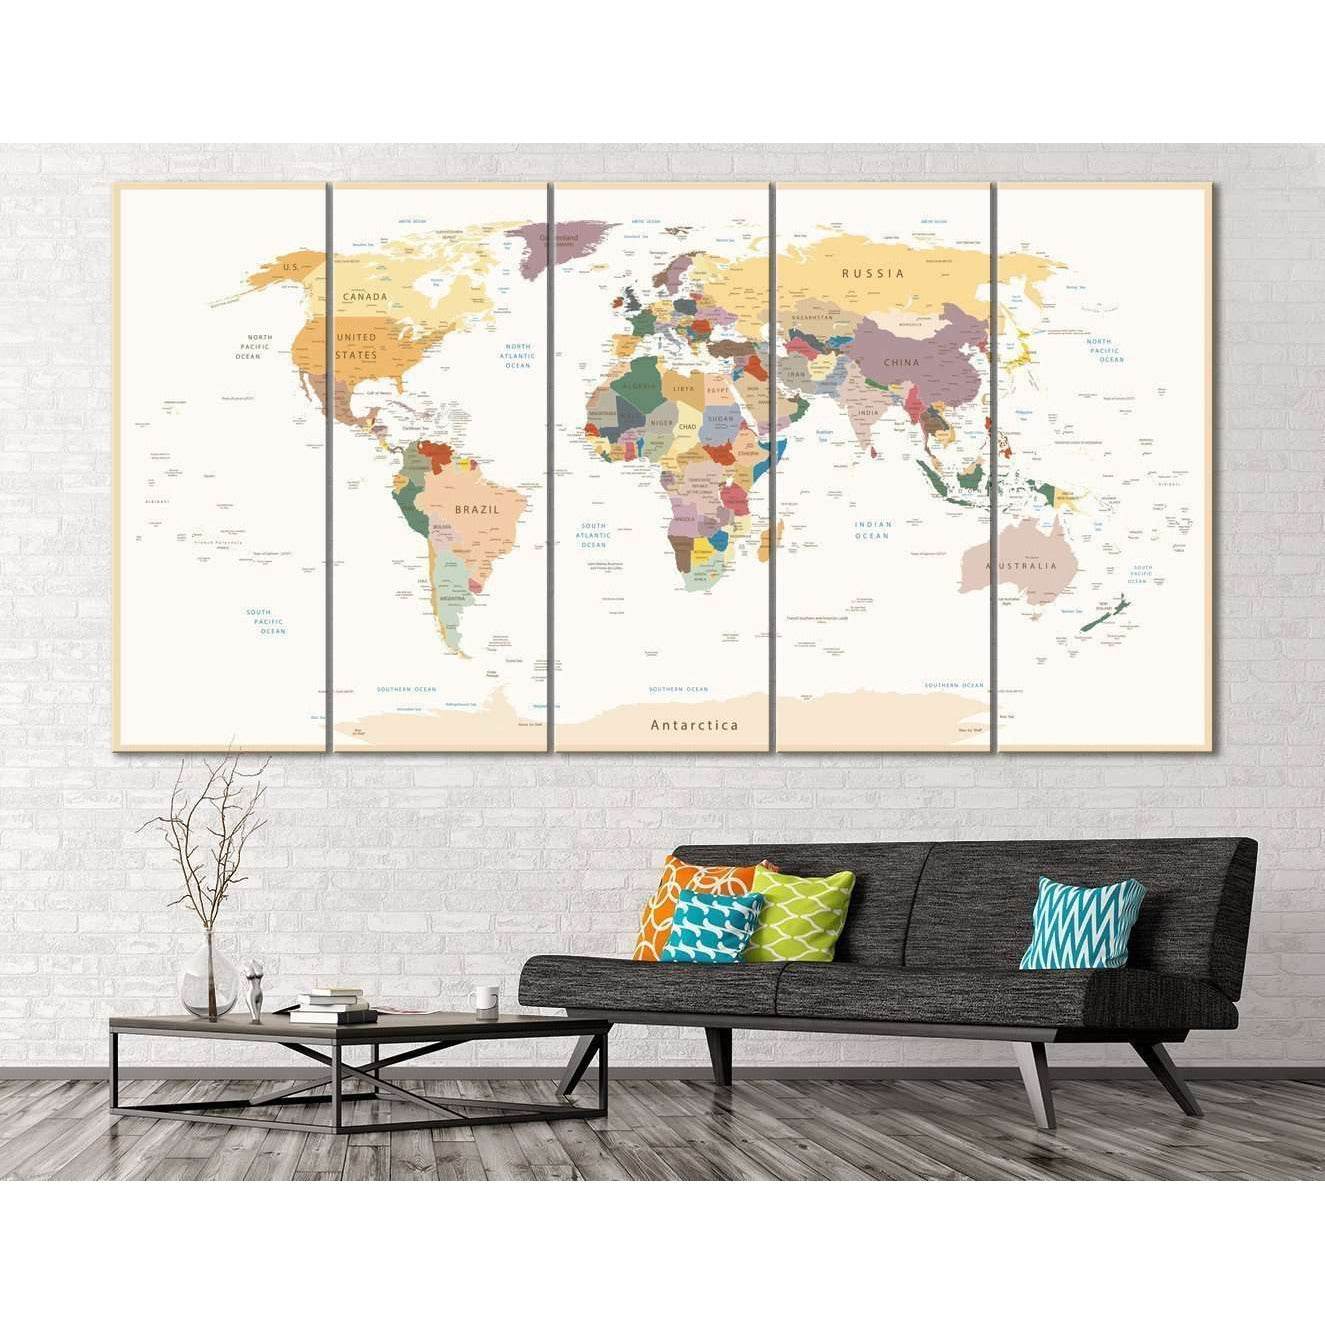 Detailed World Map for Office Wall DecorDecorate your walls with a stunning Detailed World Map Canvas Art Print from the world's largest art gallery. Choose from thousands of Detailed World Map artworks with various sizing options. Choose your perfect art